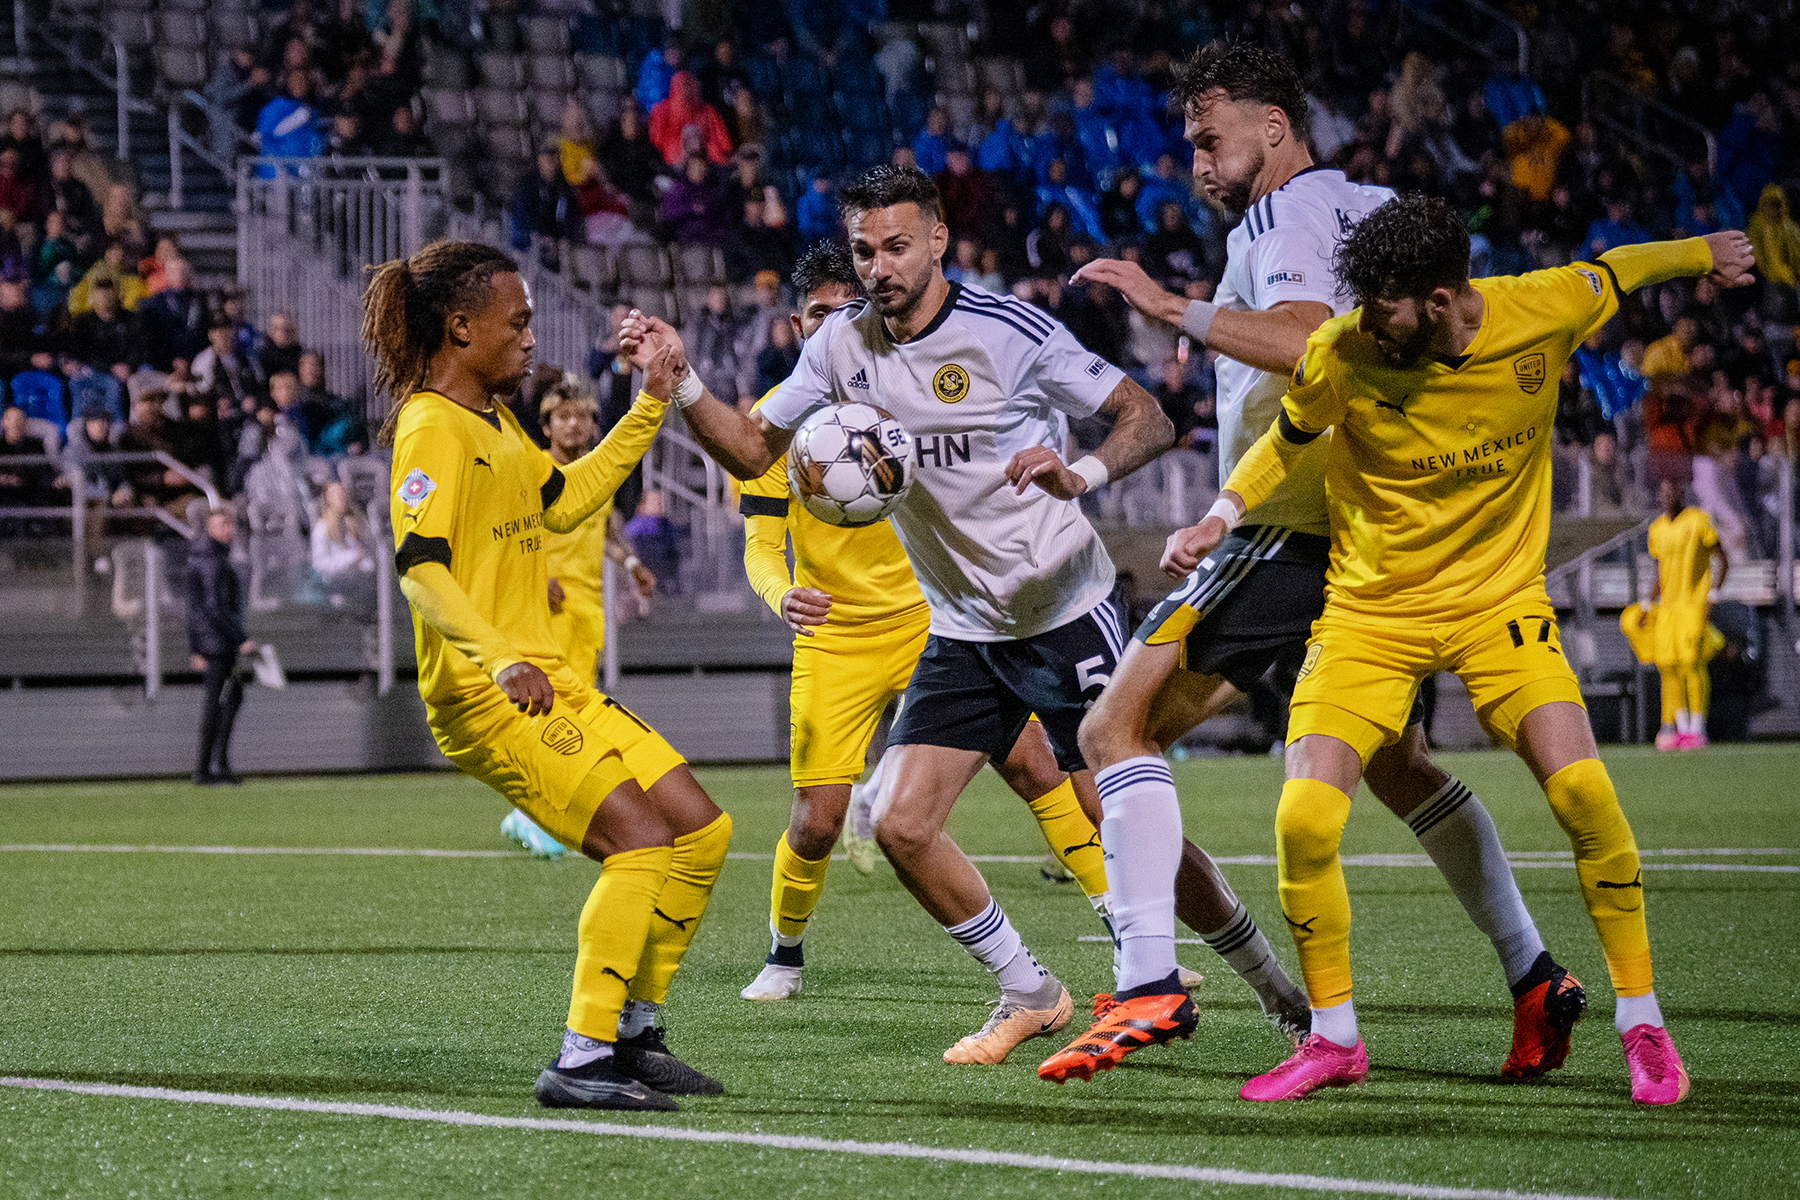 Riverhounds defenders Arturo Ordóñez and Joe Farrell battle for the ball in the team's 2-1 win over New Mexico United on Sept. 23, 2023 at Highmark Stadium.